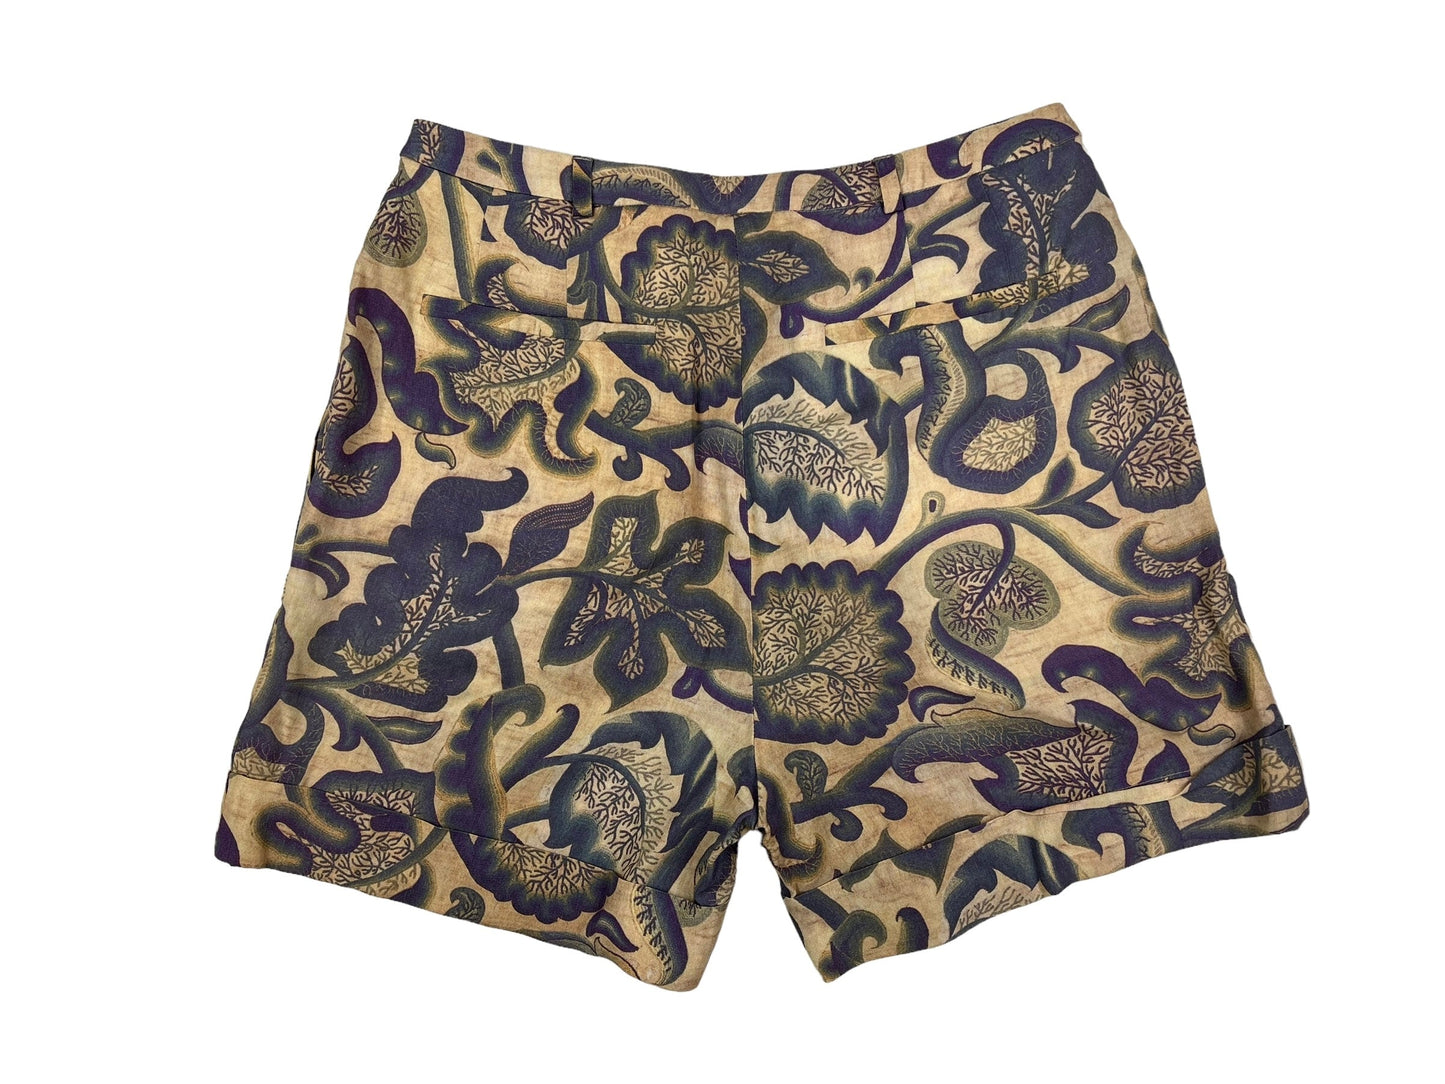 Vivienne Westwood S/S 2013 Red Label shorts